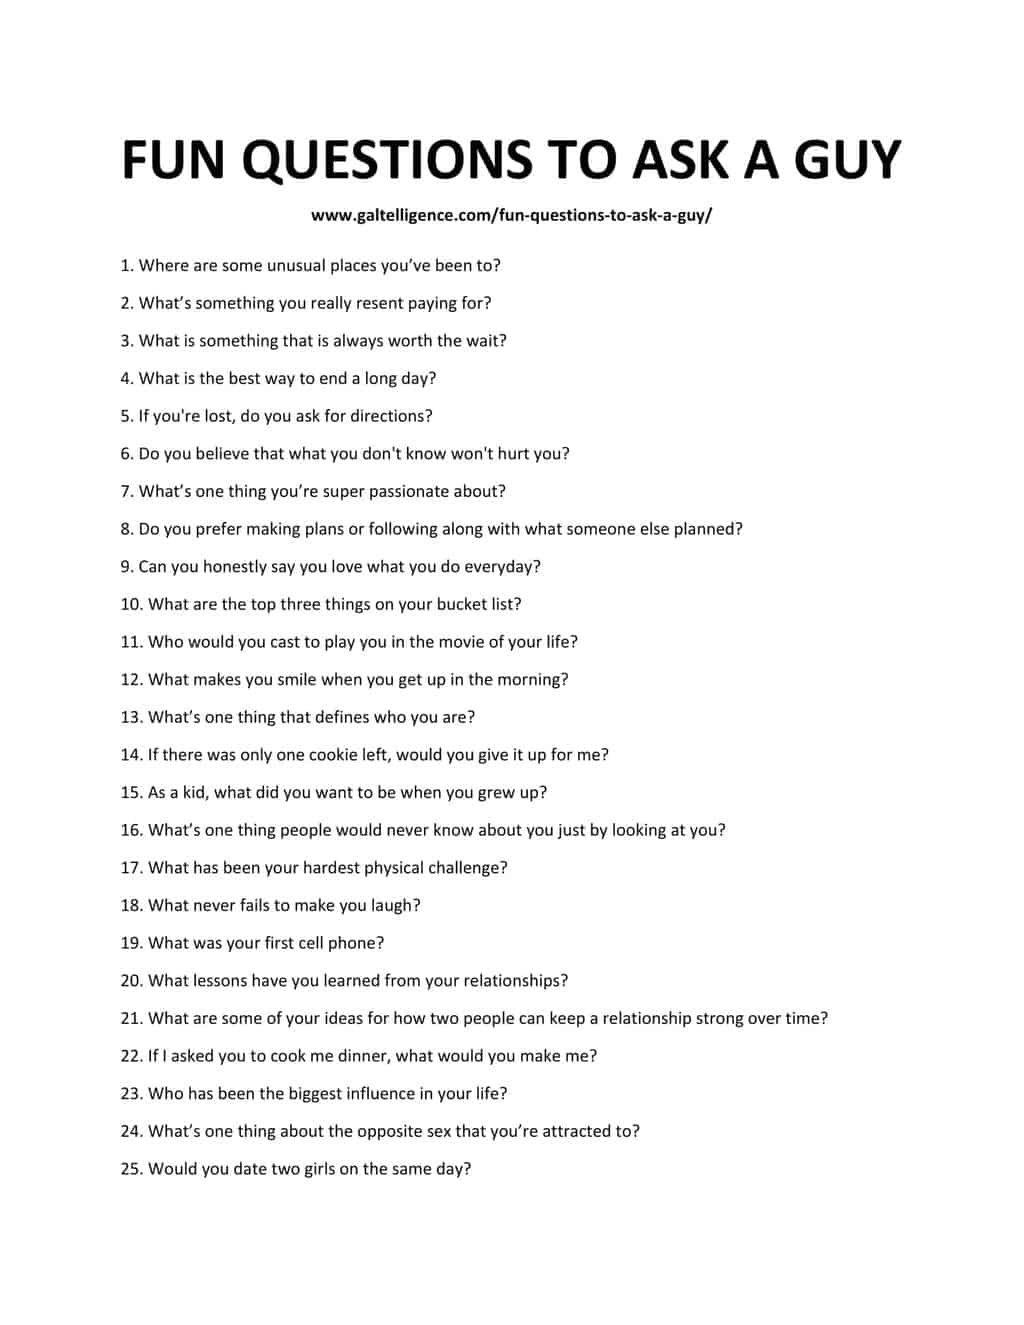 Game funny questions dating the 100+ Fun